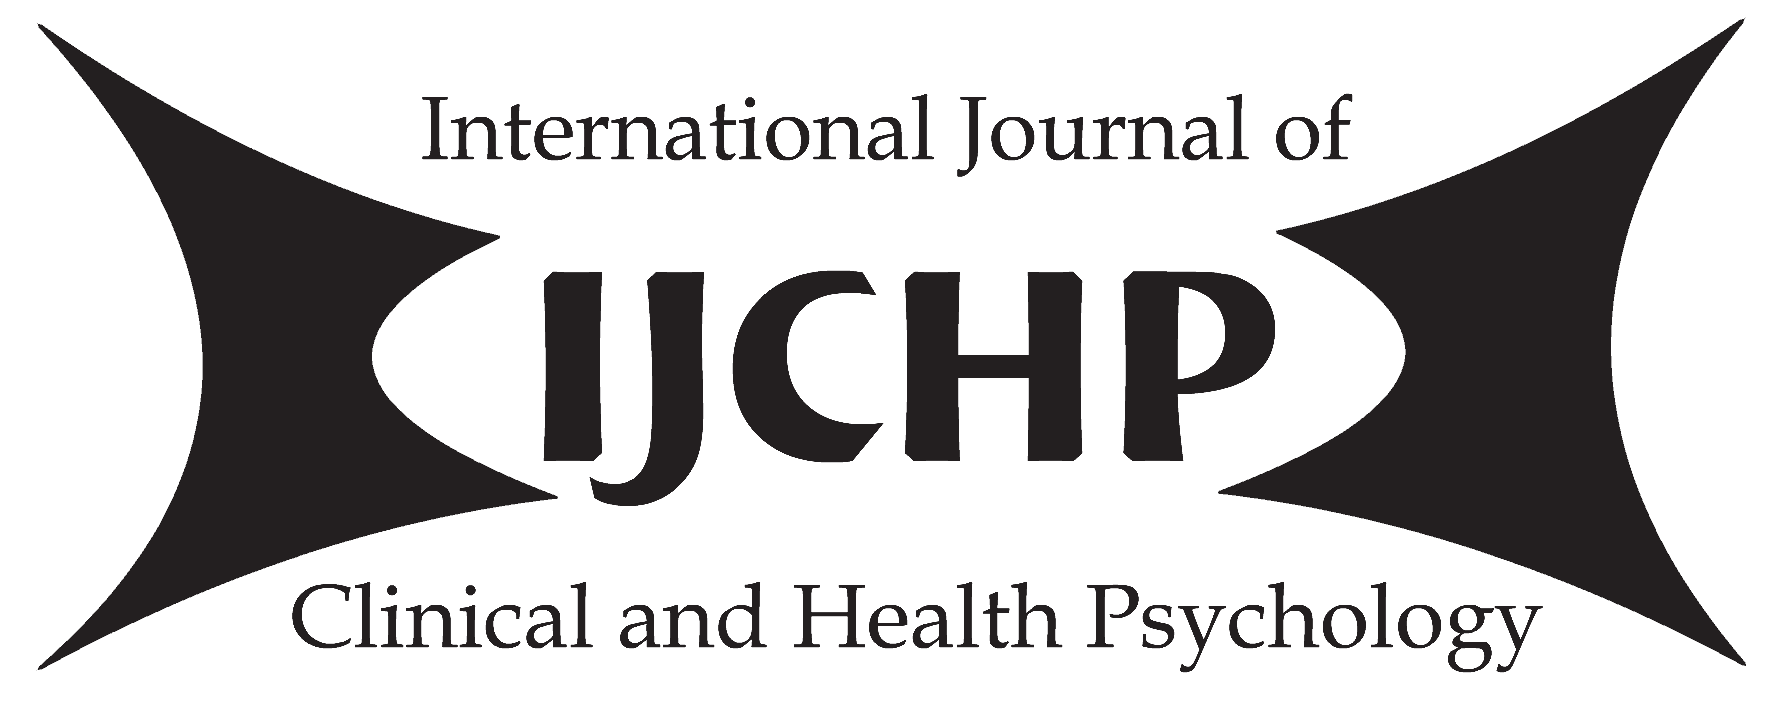 International Journal of Clinical and Health Psychology ISSN 1697-2600 2007, Vol. 7, Nº 3, pp.